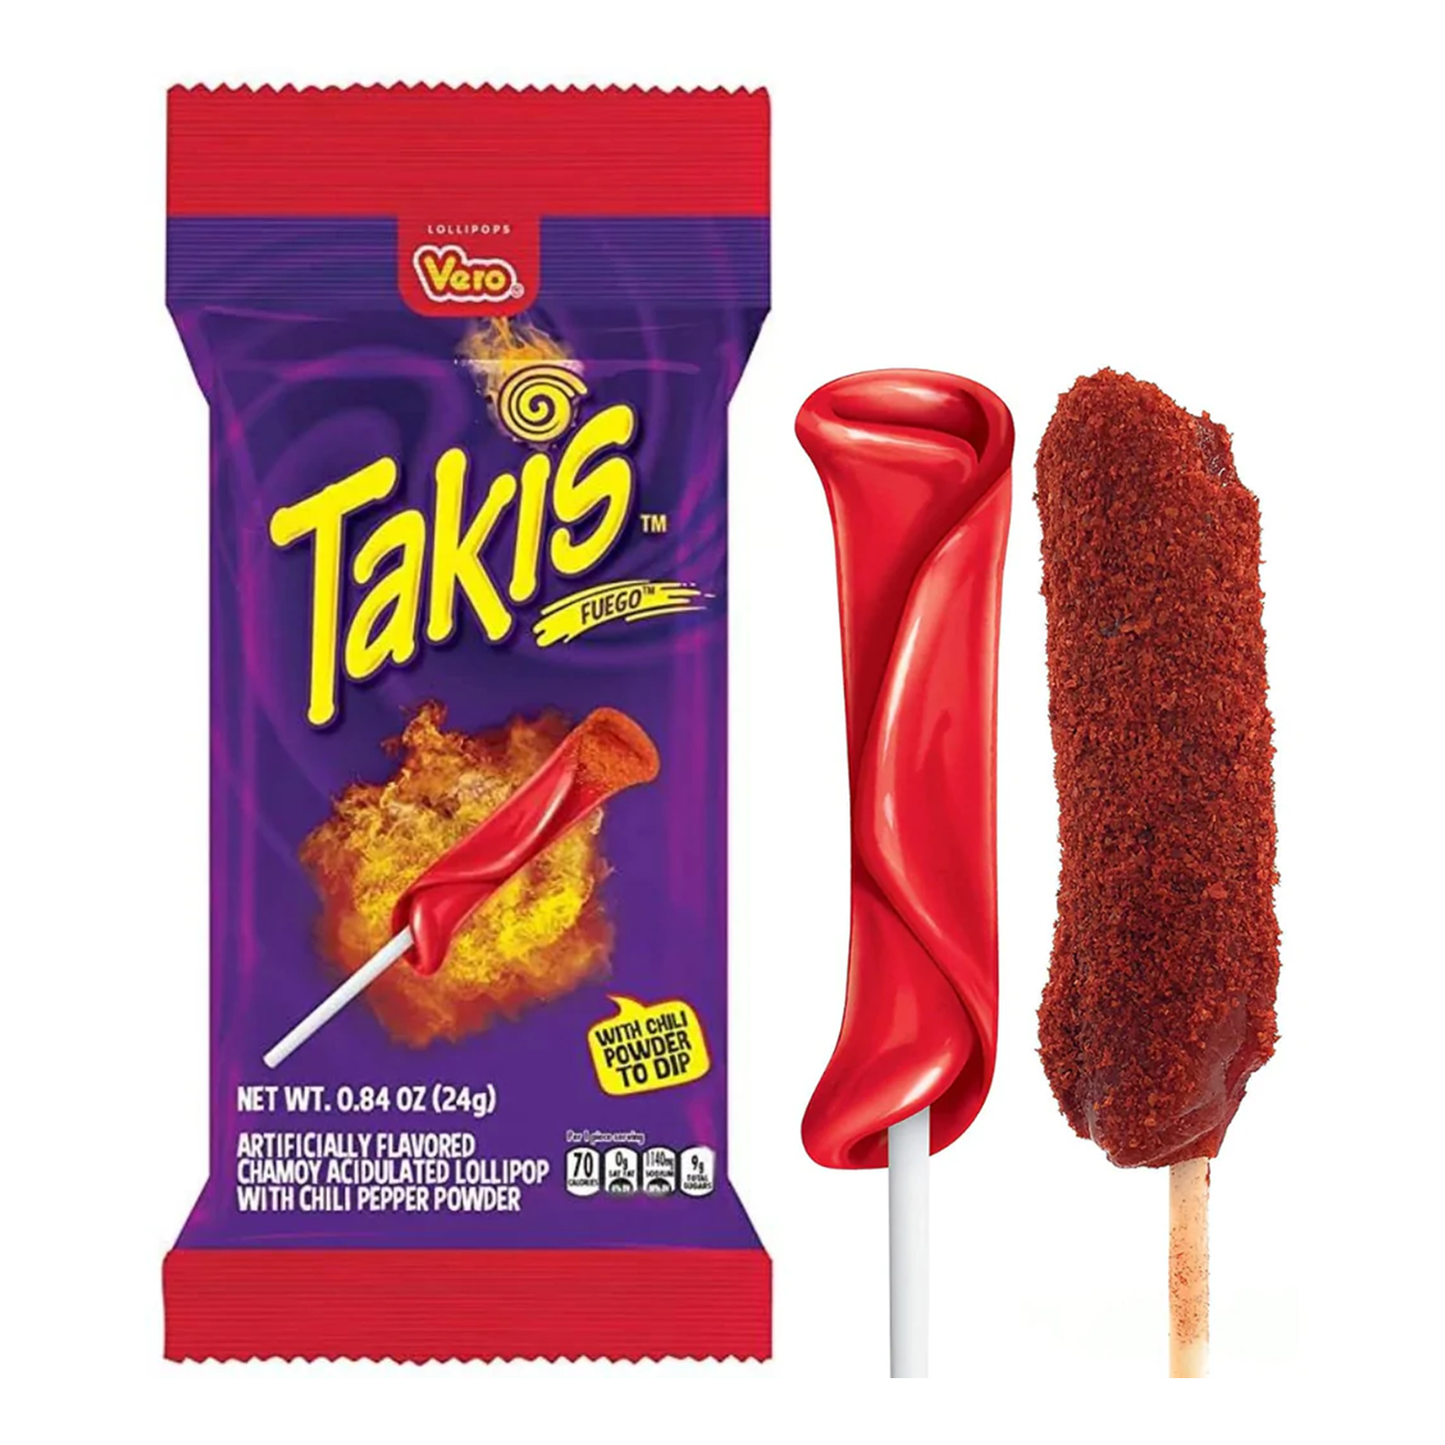 Takis Chips - Many Flavours